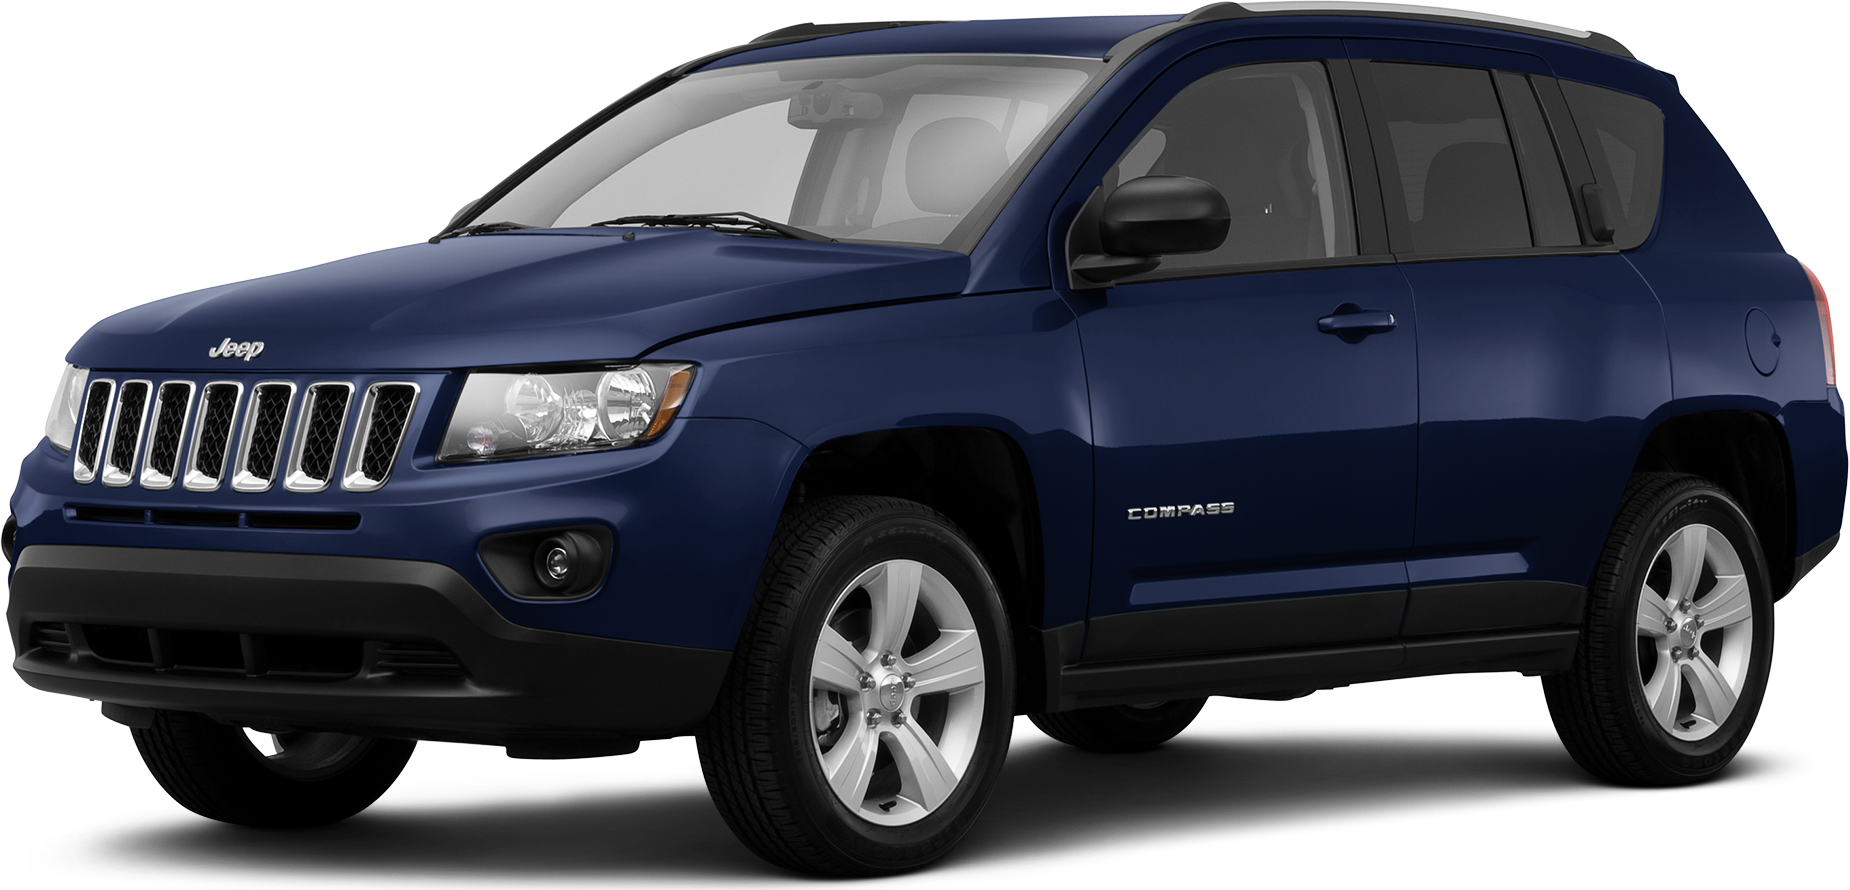 14 Jeep Compass Price Kbb Value Cars For Sale Kelley Blue Book